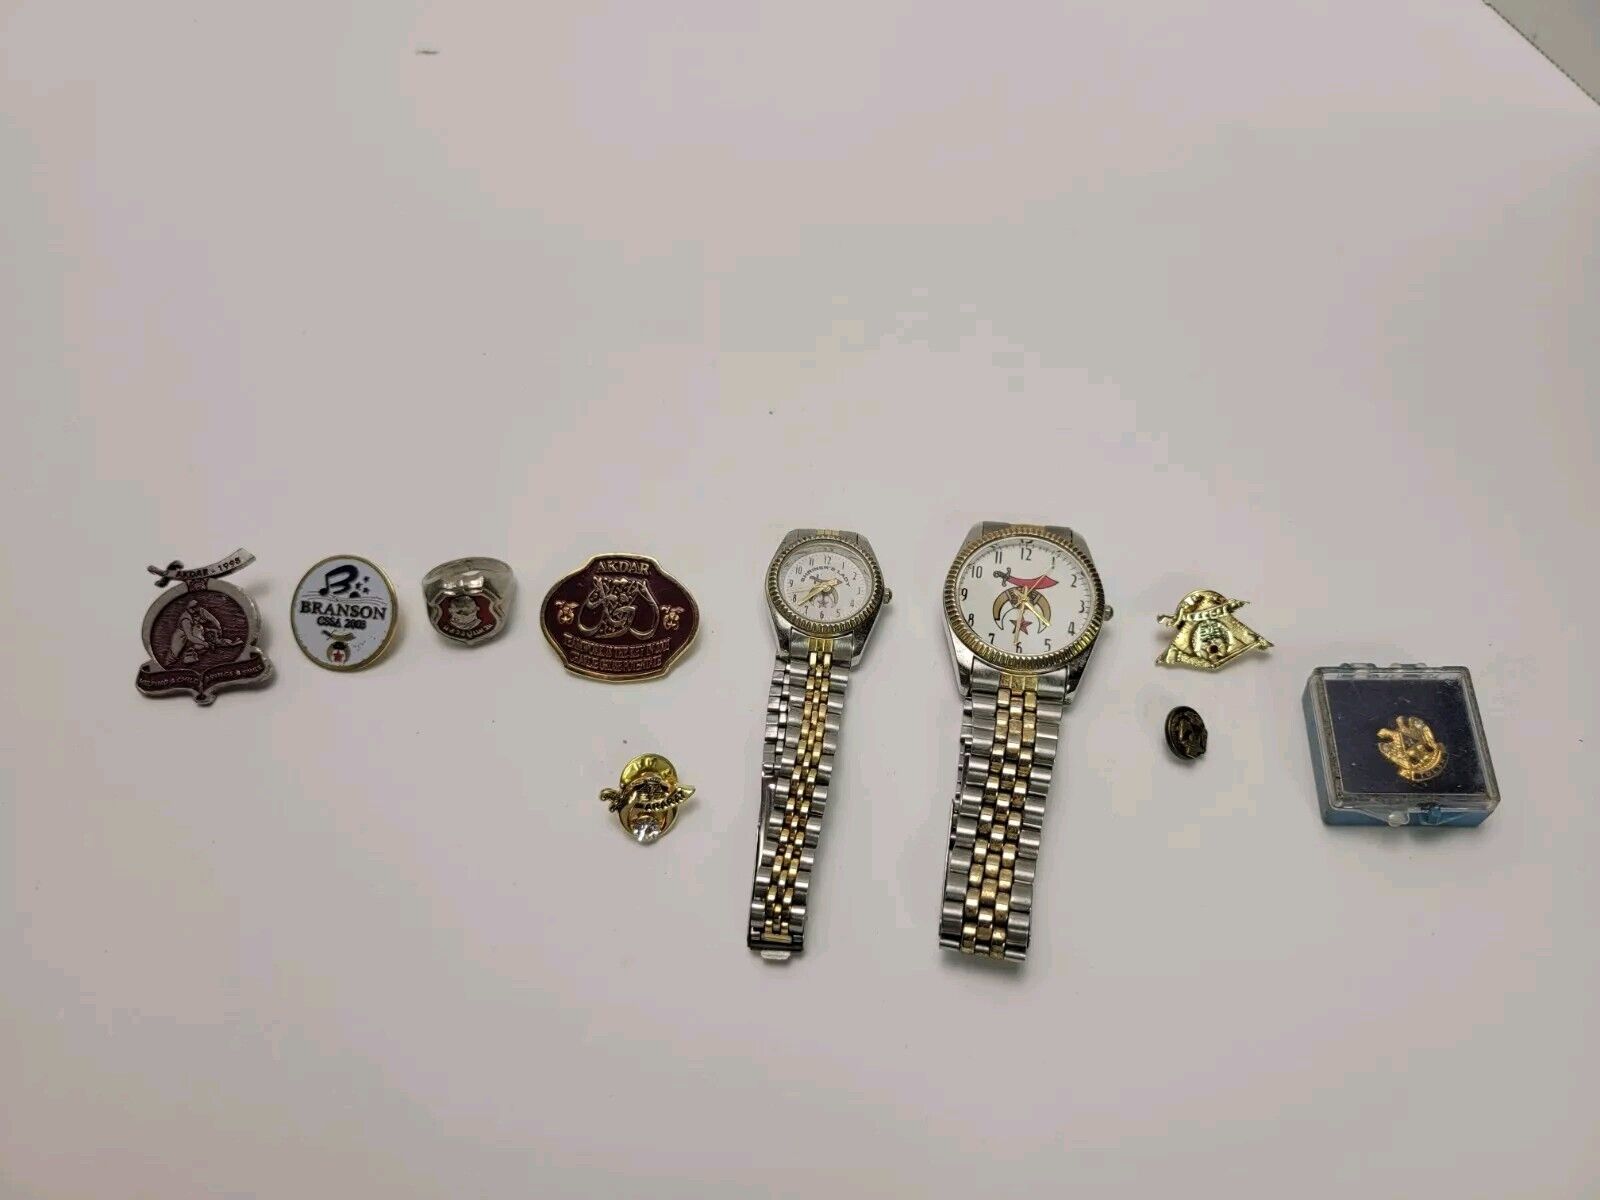 Lot of Vintage Shriner's Pins And Watches